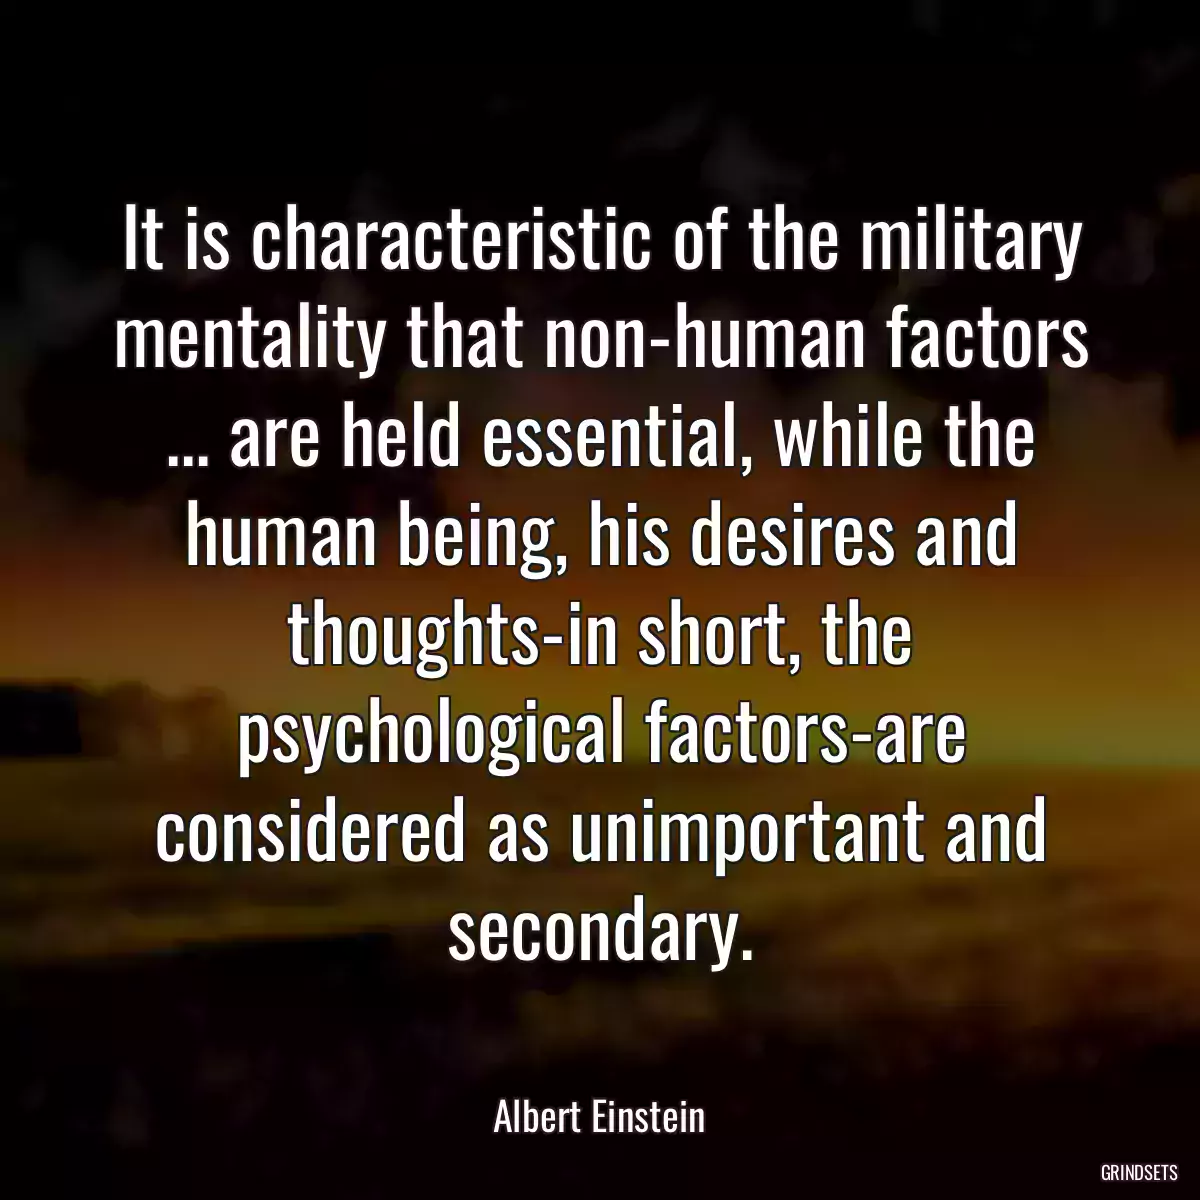 It is characteristic of the military mentality that non-human factors ... are held essential, while the human being, his desires and thoughts-in short, the psychological factors-are considered as unimportant and secondary.